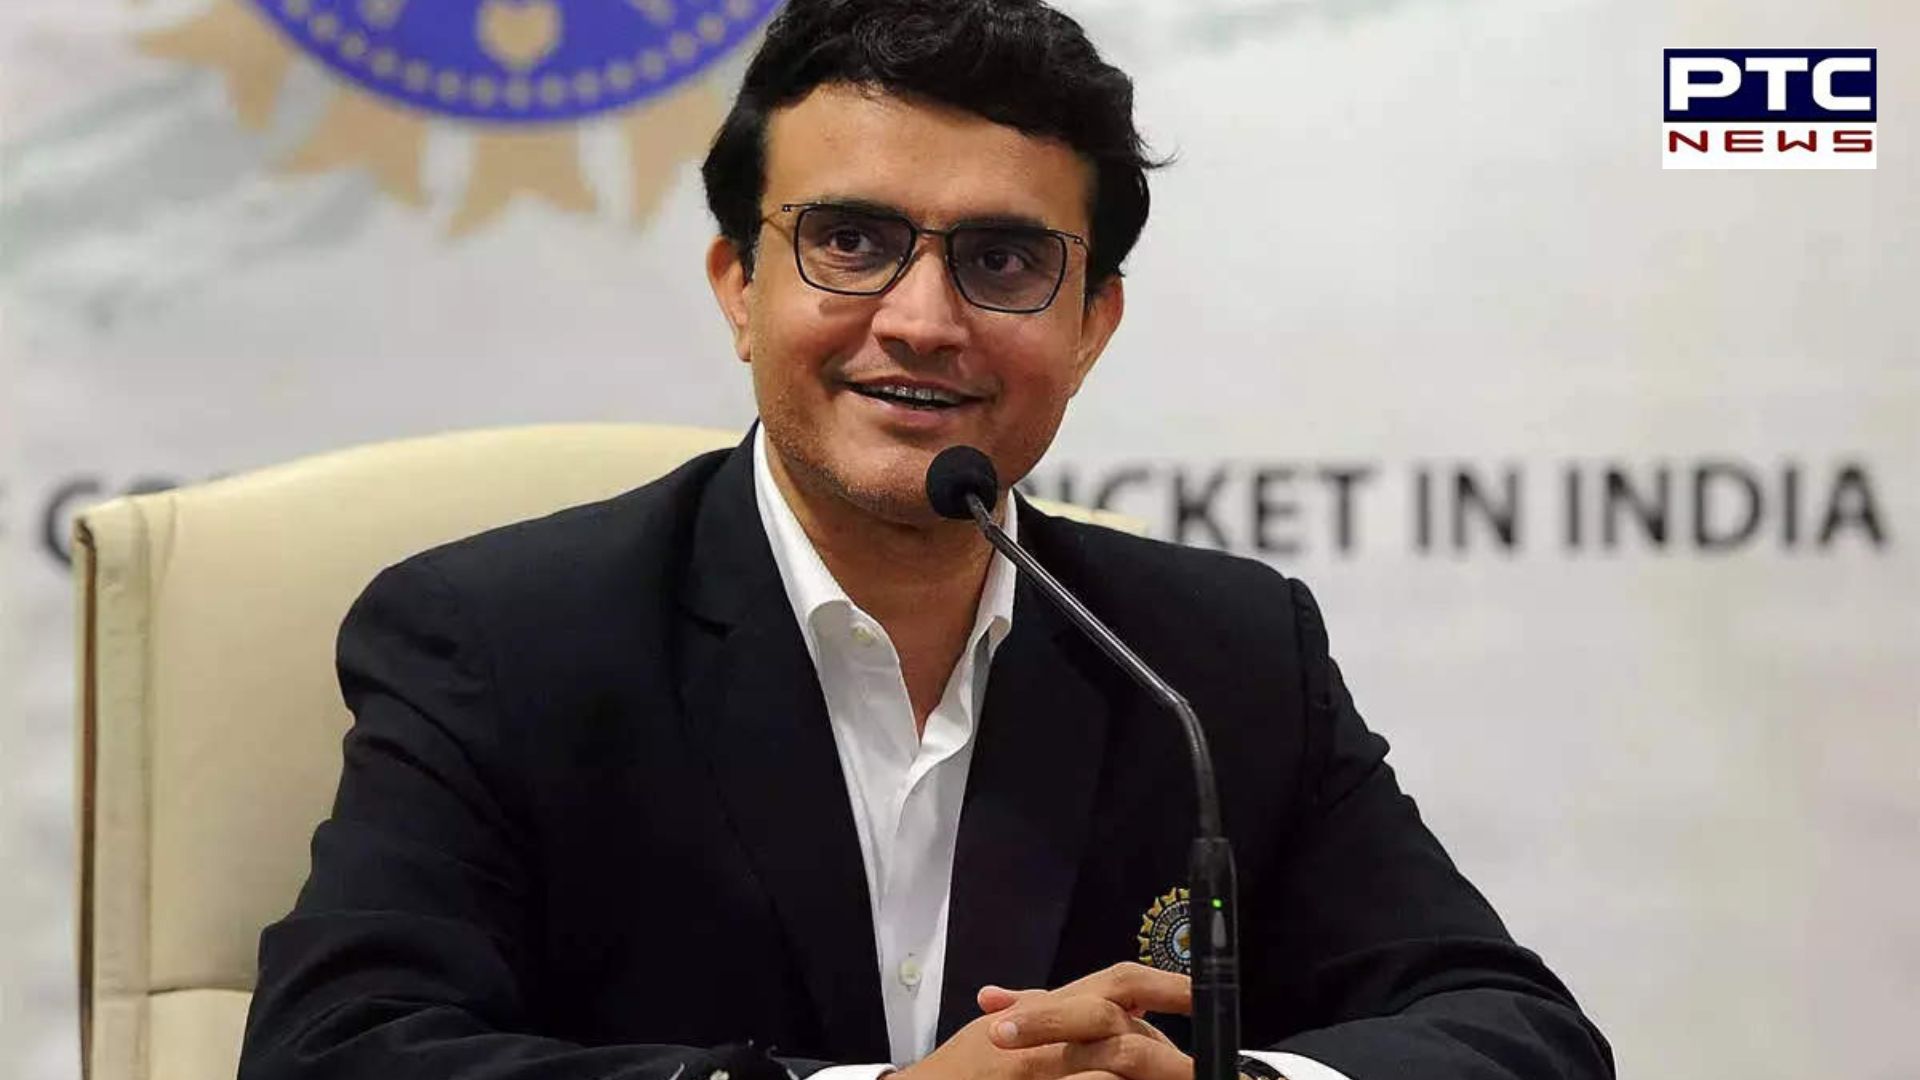 Ganguly's concise answer to the unique quality question unshared by Sachin, Kohli, Dhoni